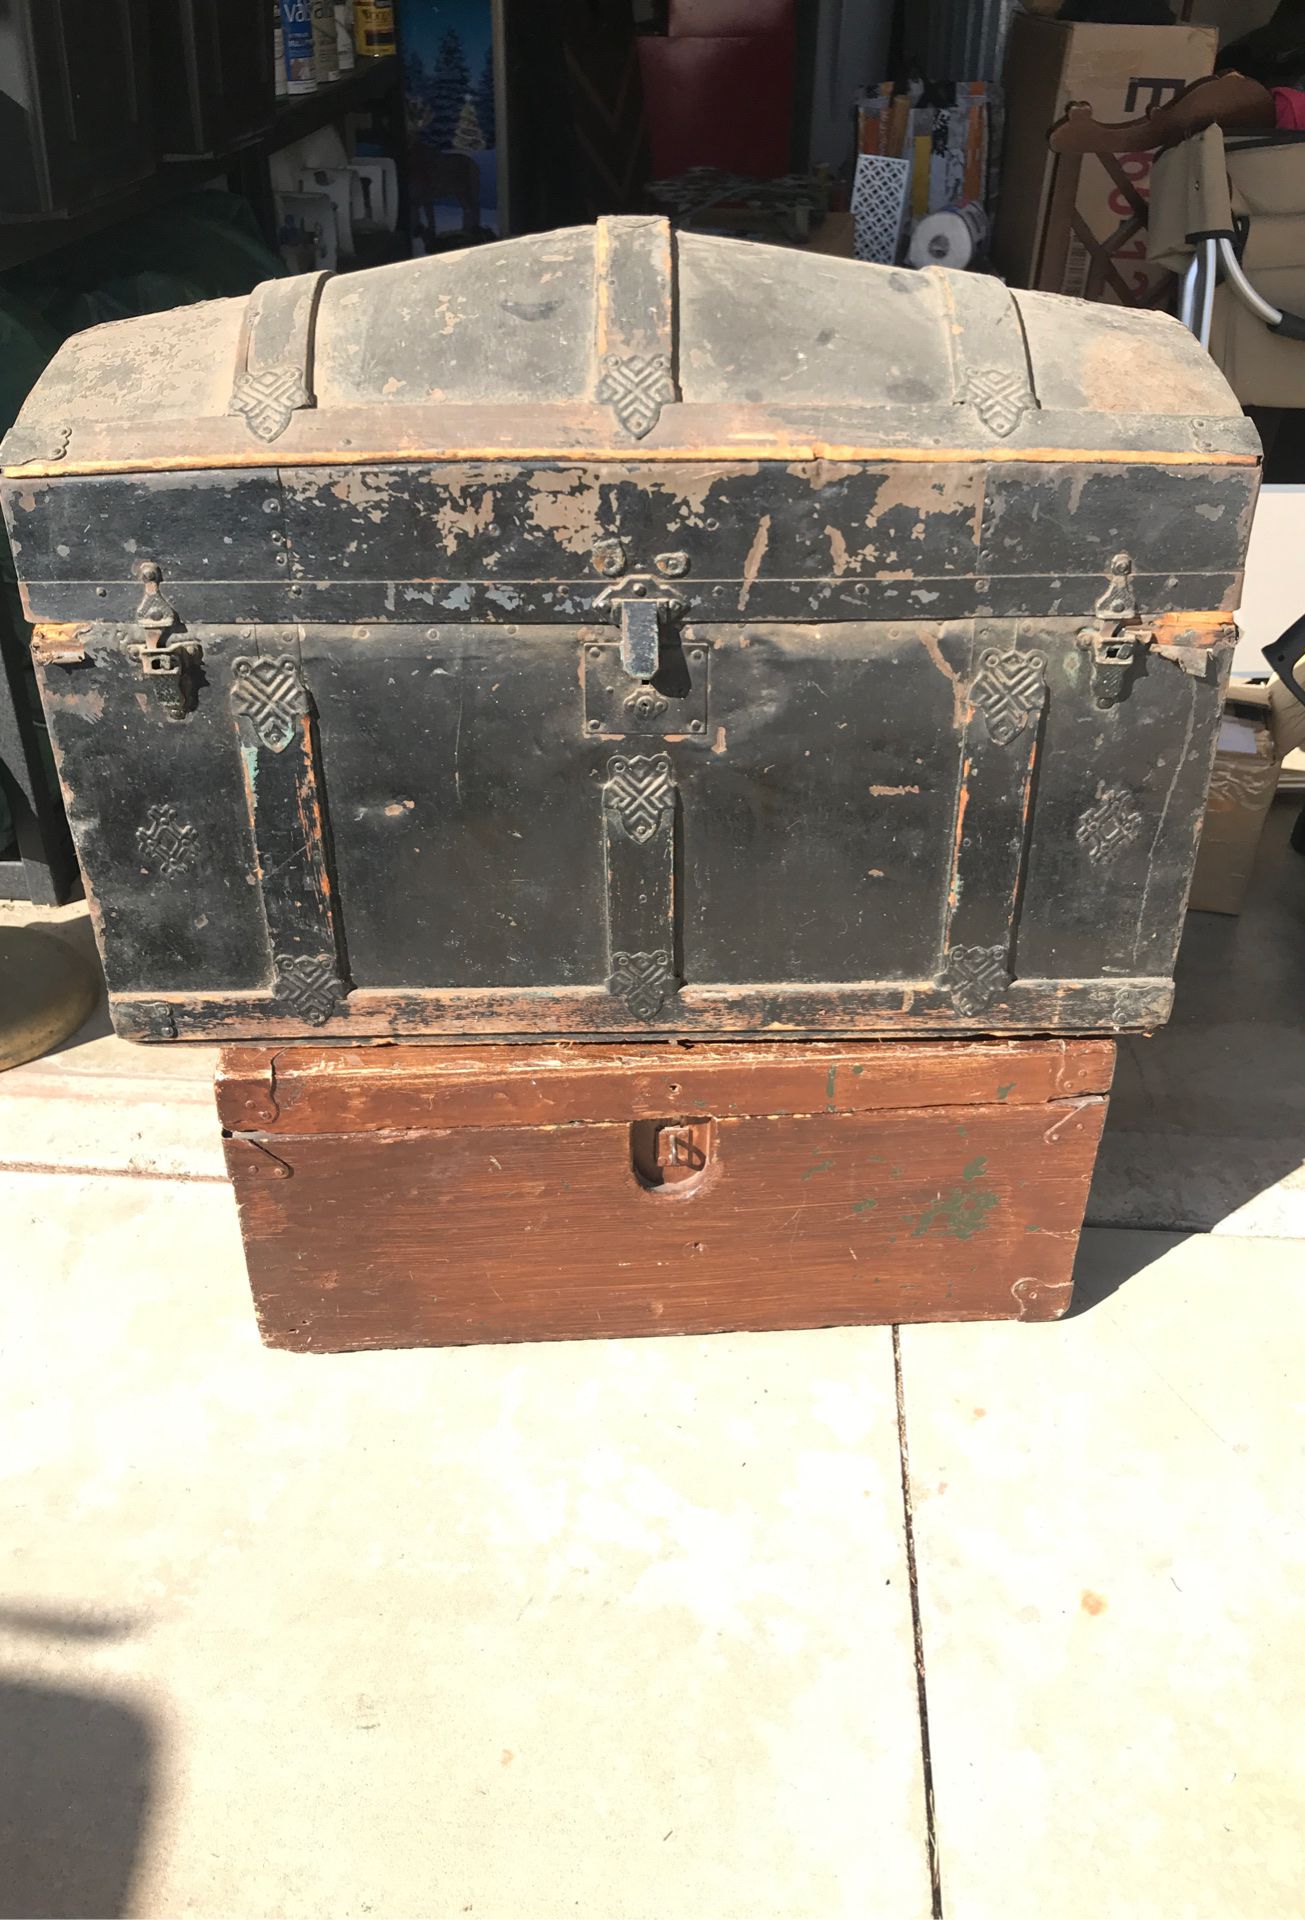 Two wooden chests